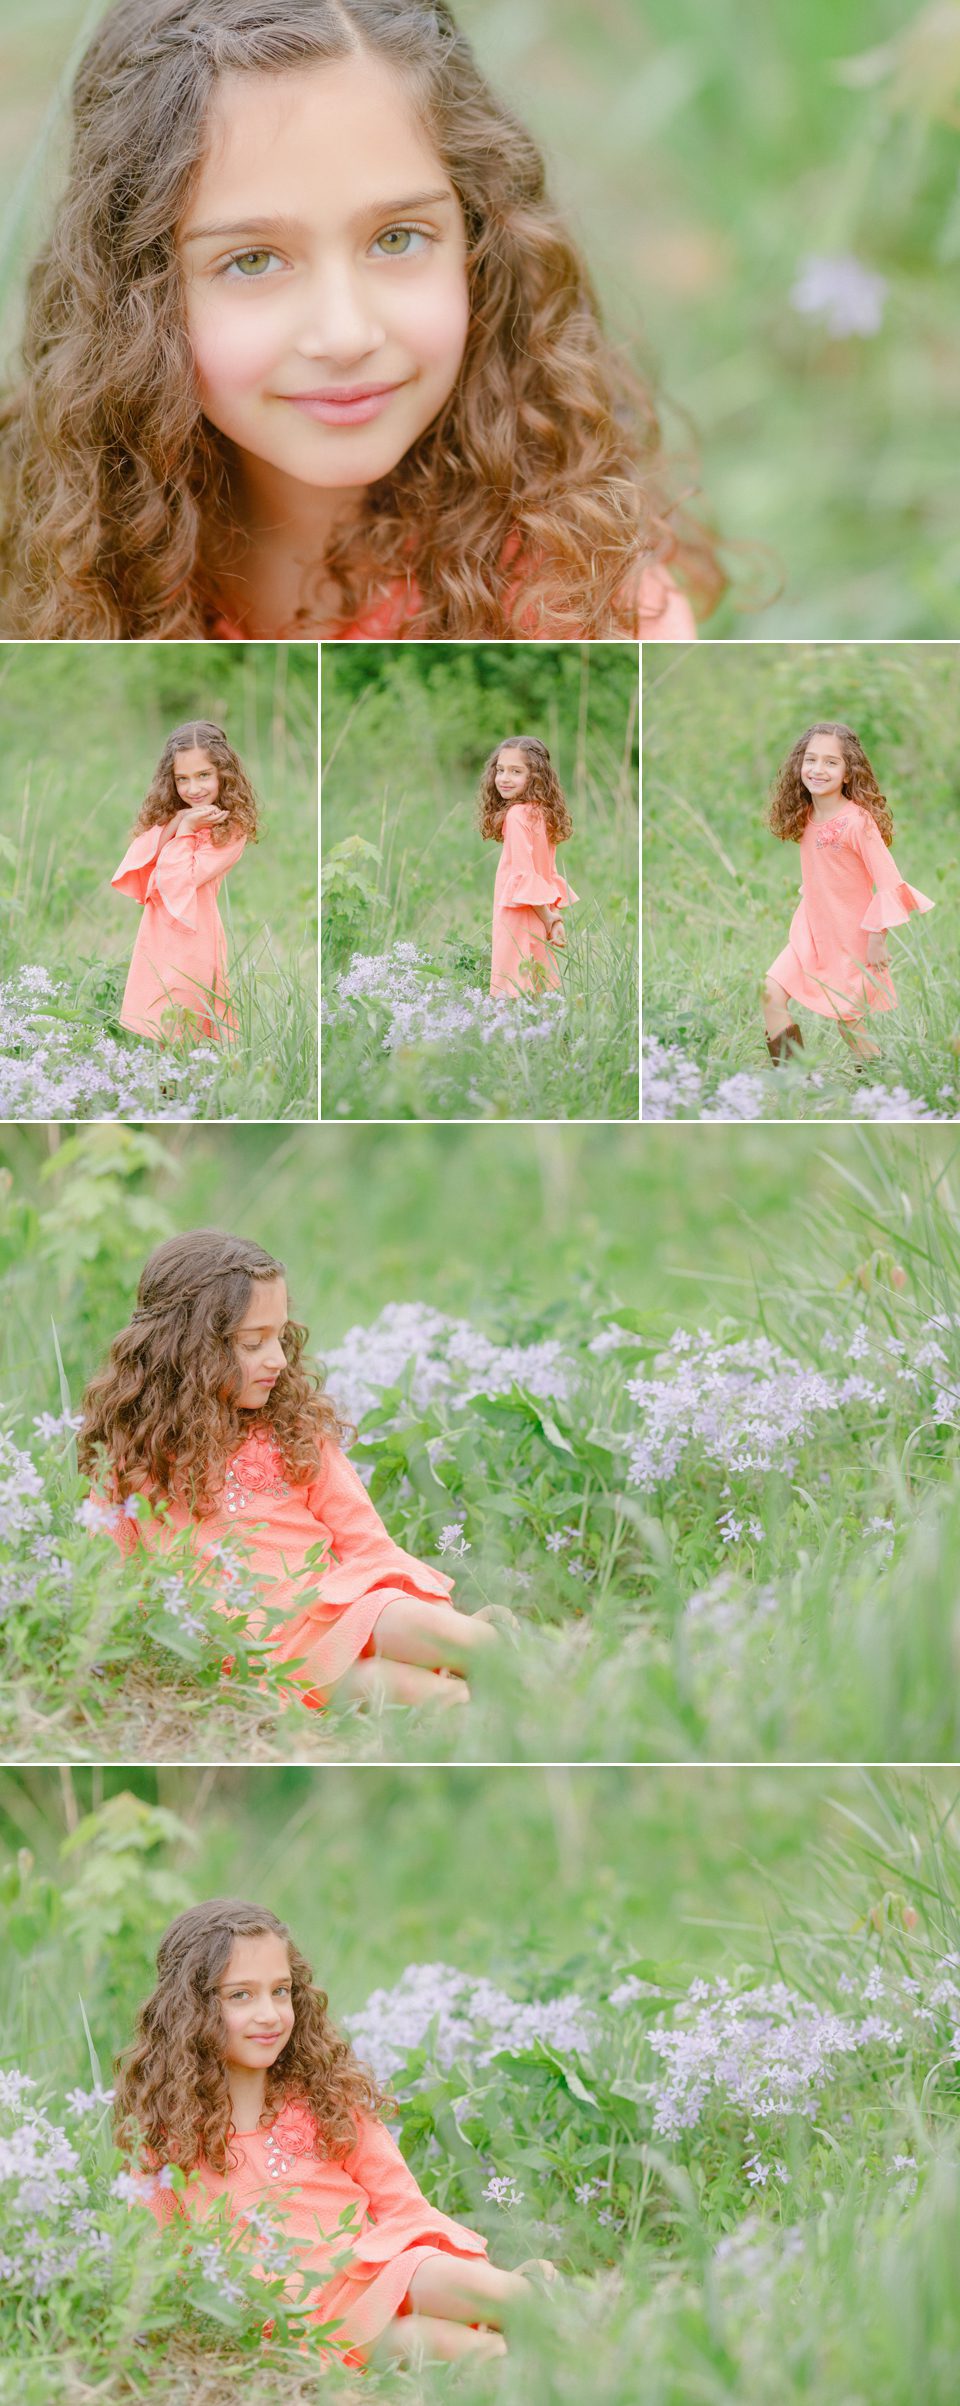 Professional photo portraits of a tween girl in a field of purple flowers by Athens GA photographer.